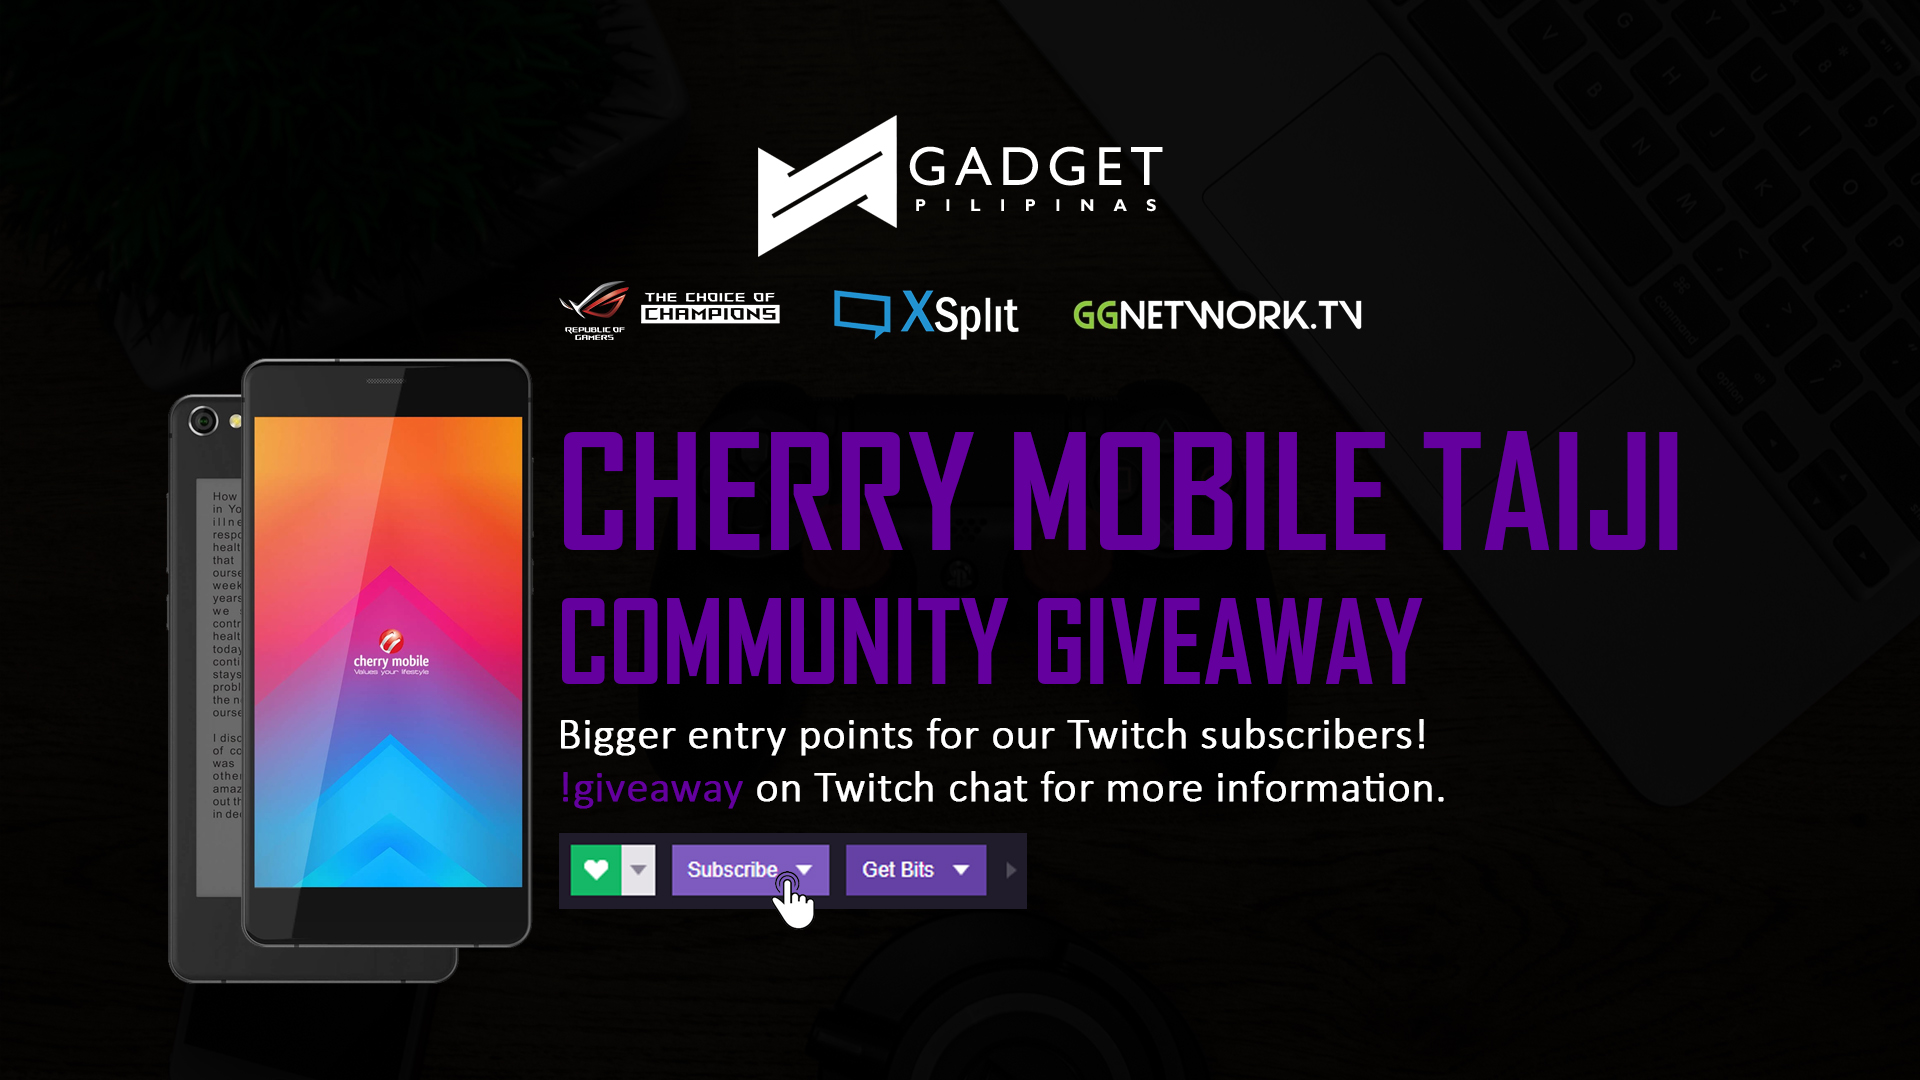 Cherry Mobile Taiji Community Giveaway